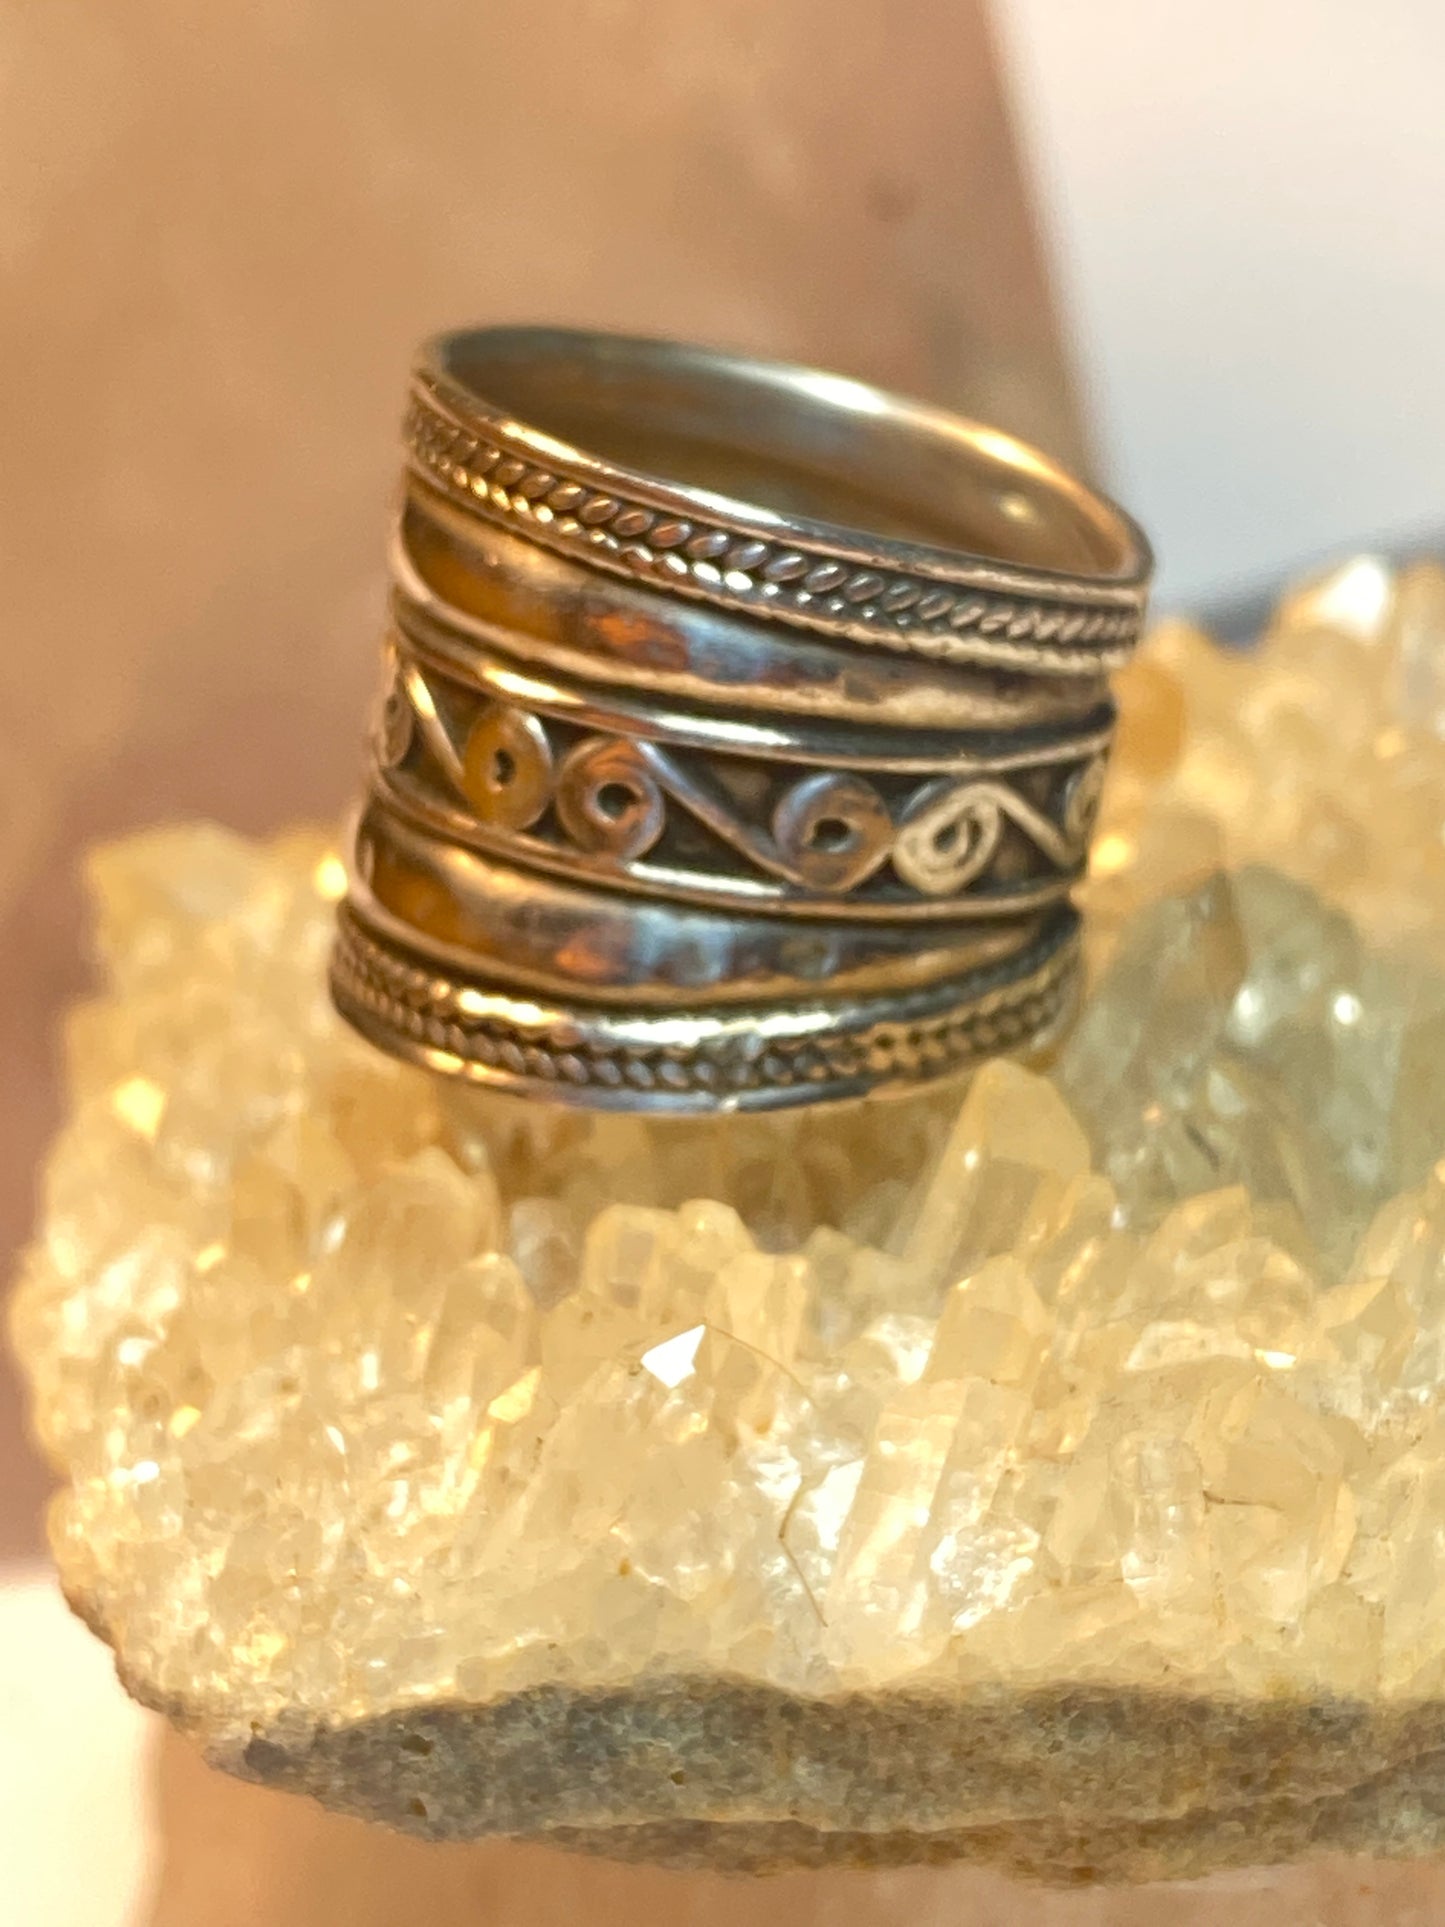 Cigar band size 6 pinky ring scrollwork detail sterling silver women girls